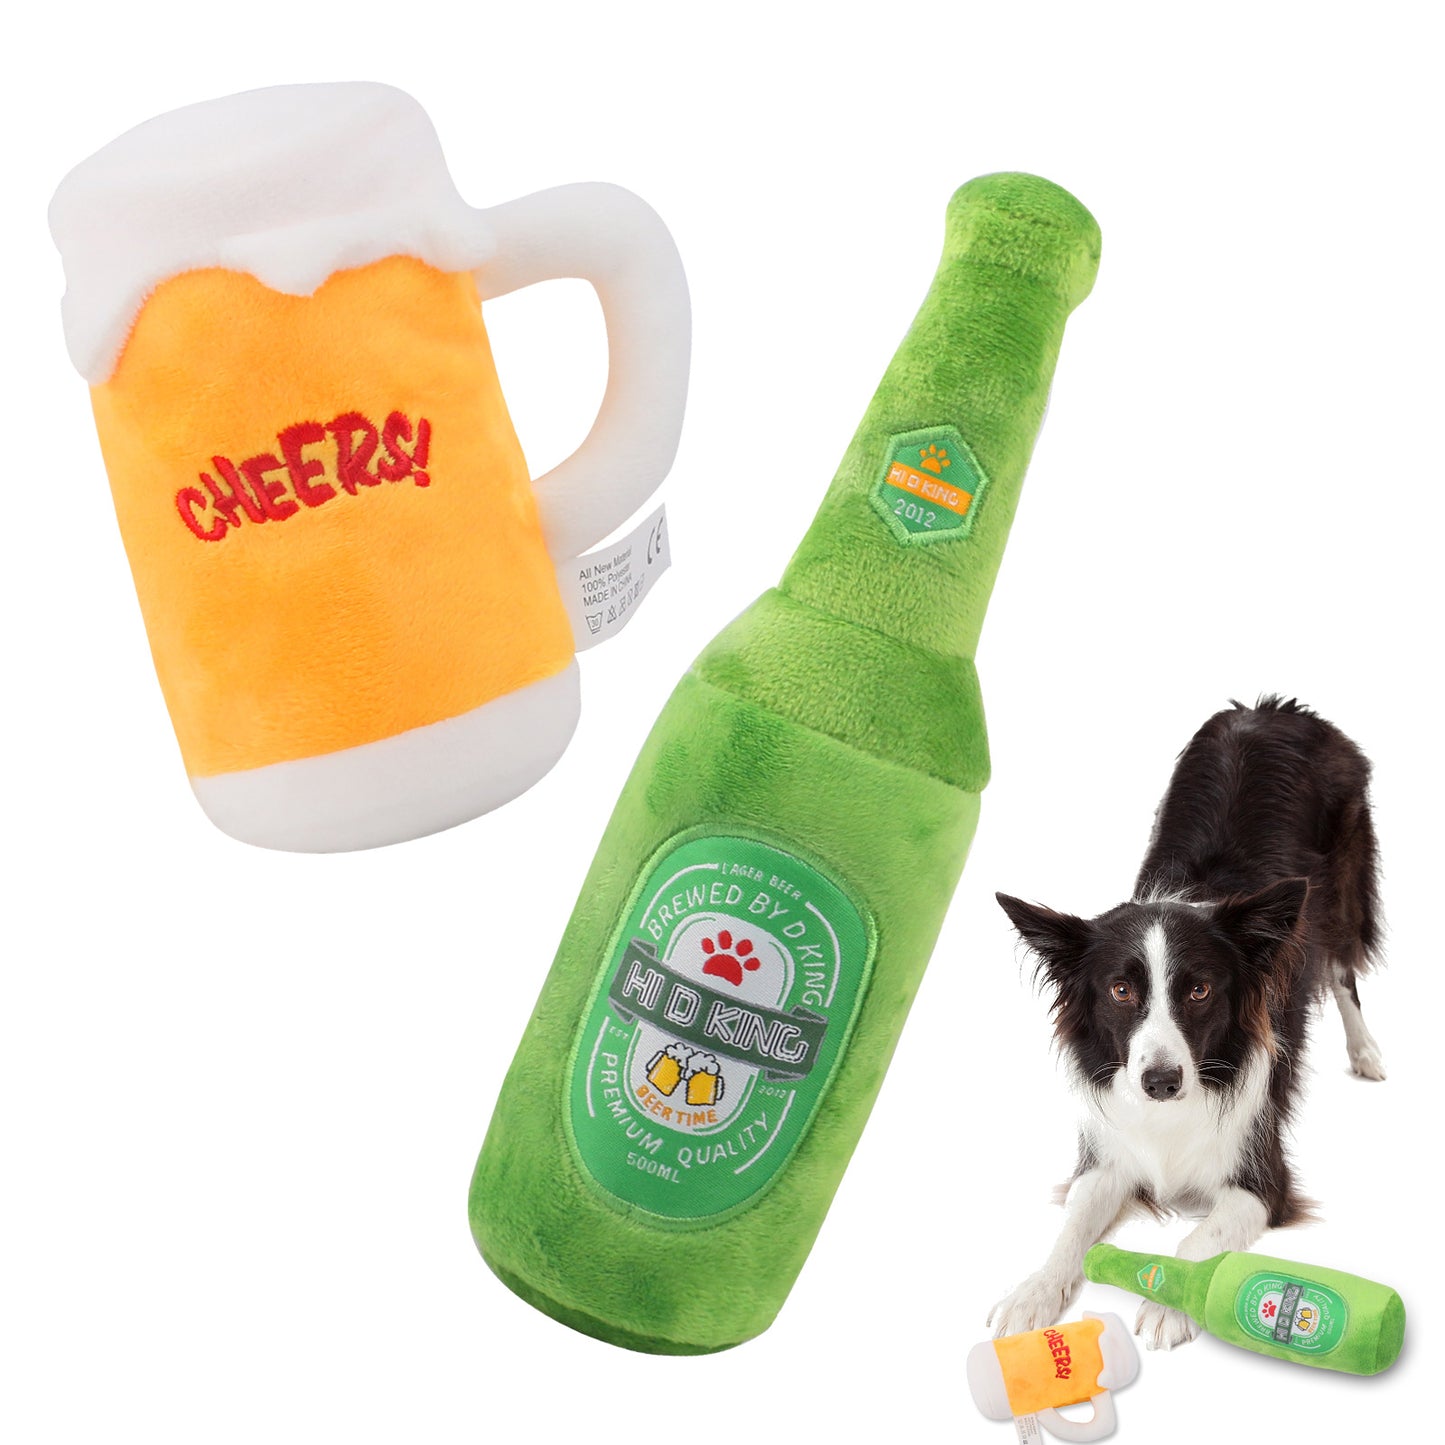 Petkin - Bottle Dog Squeaky Toy